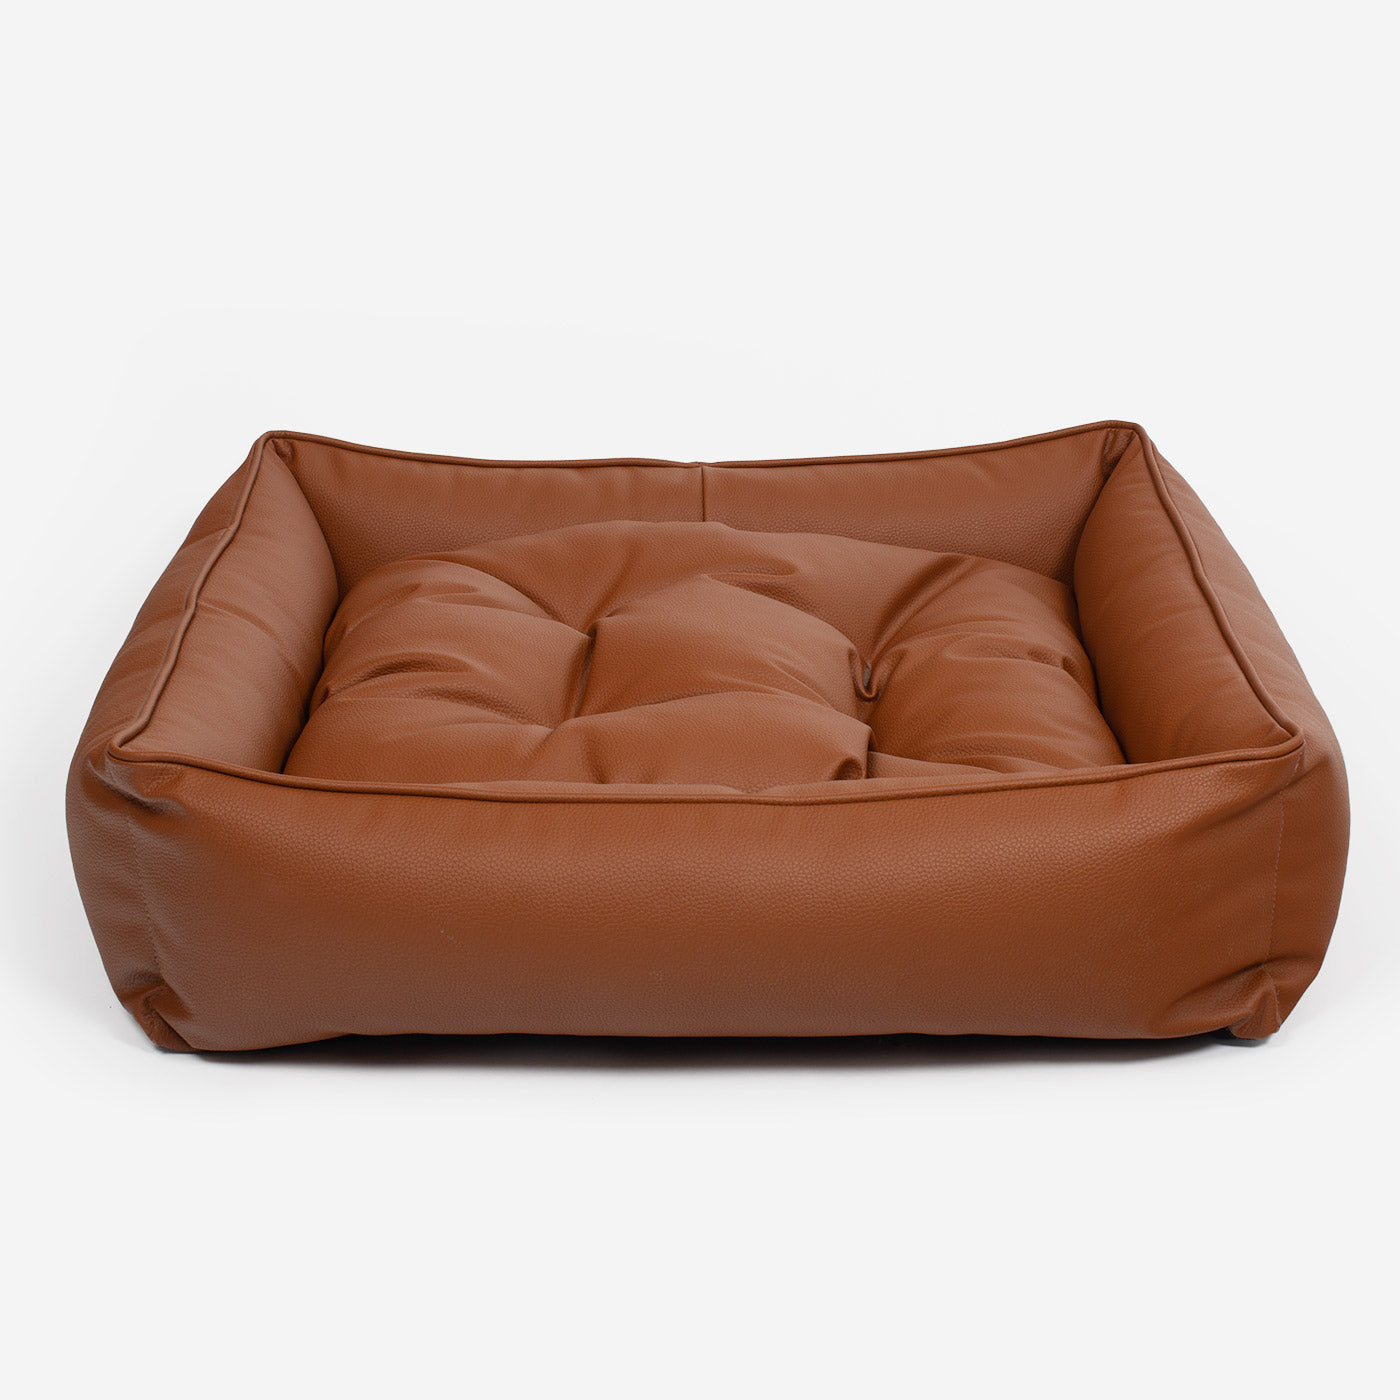 [color:ember] Luxury Handmade Box Bed in Rhino Tough Desert Faux Leather, in Ember, Perfect For Your Pets Nap Time! Available To Personalize at Lords & Labradors US